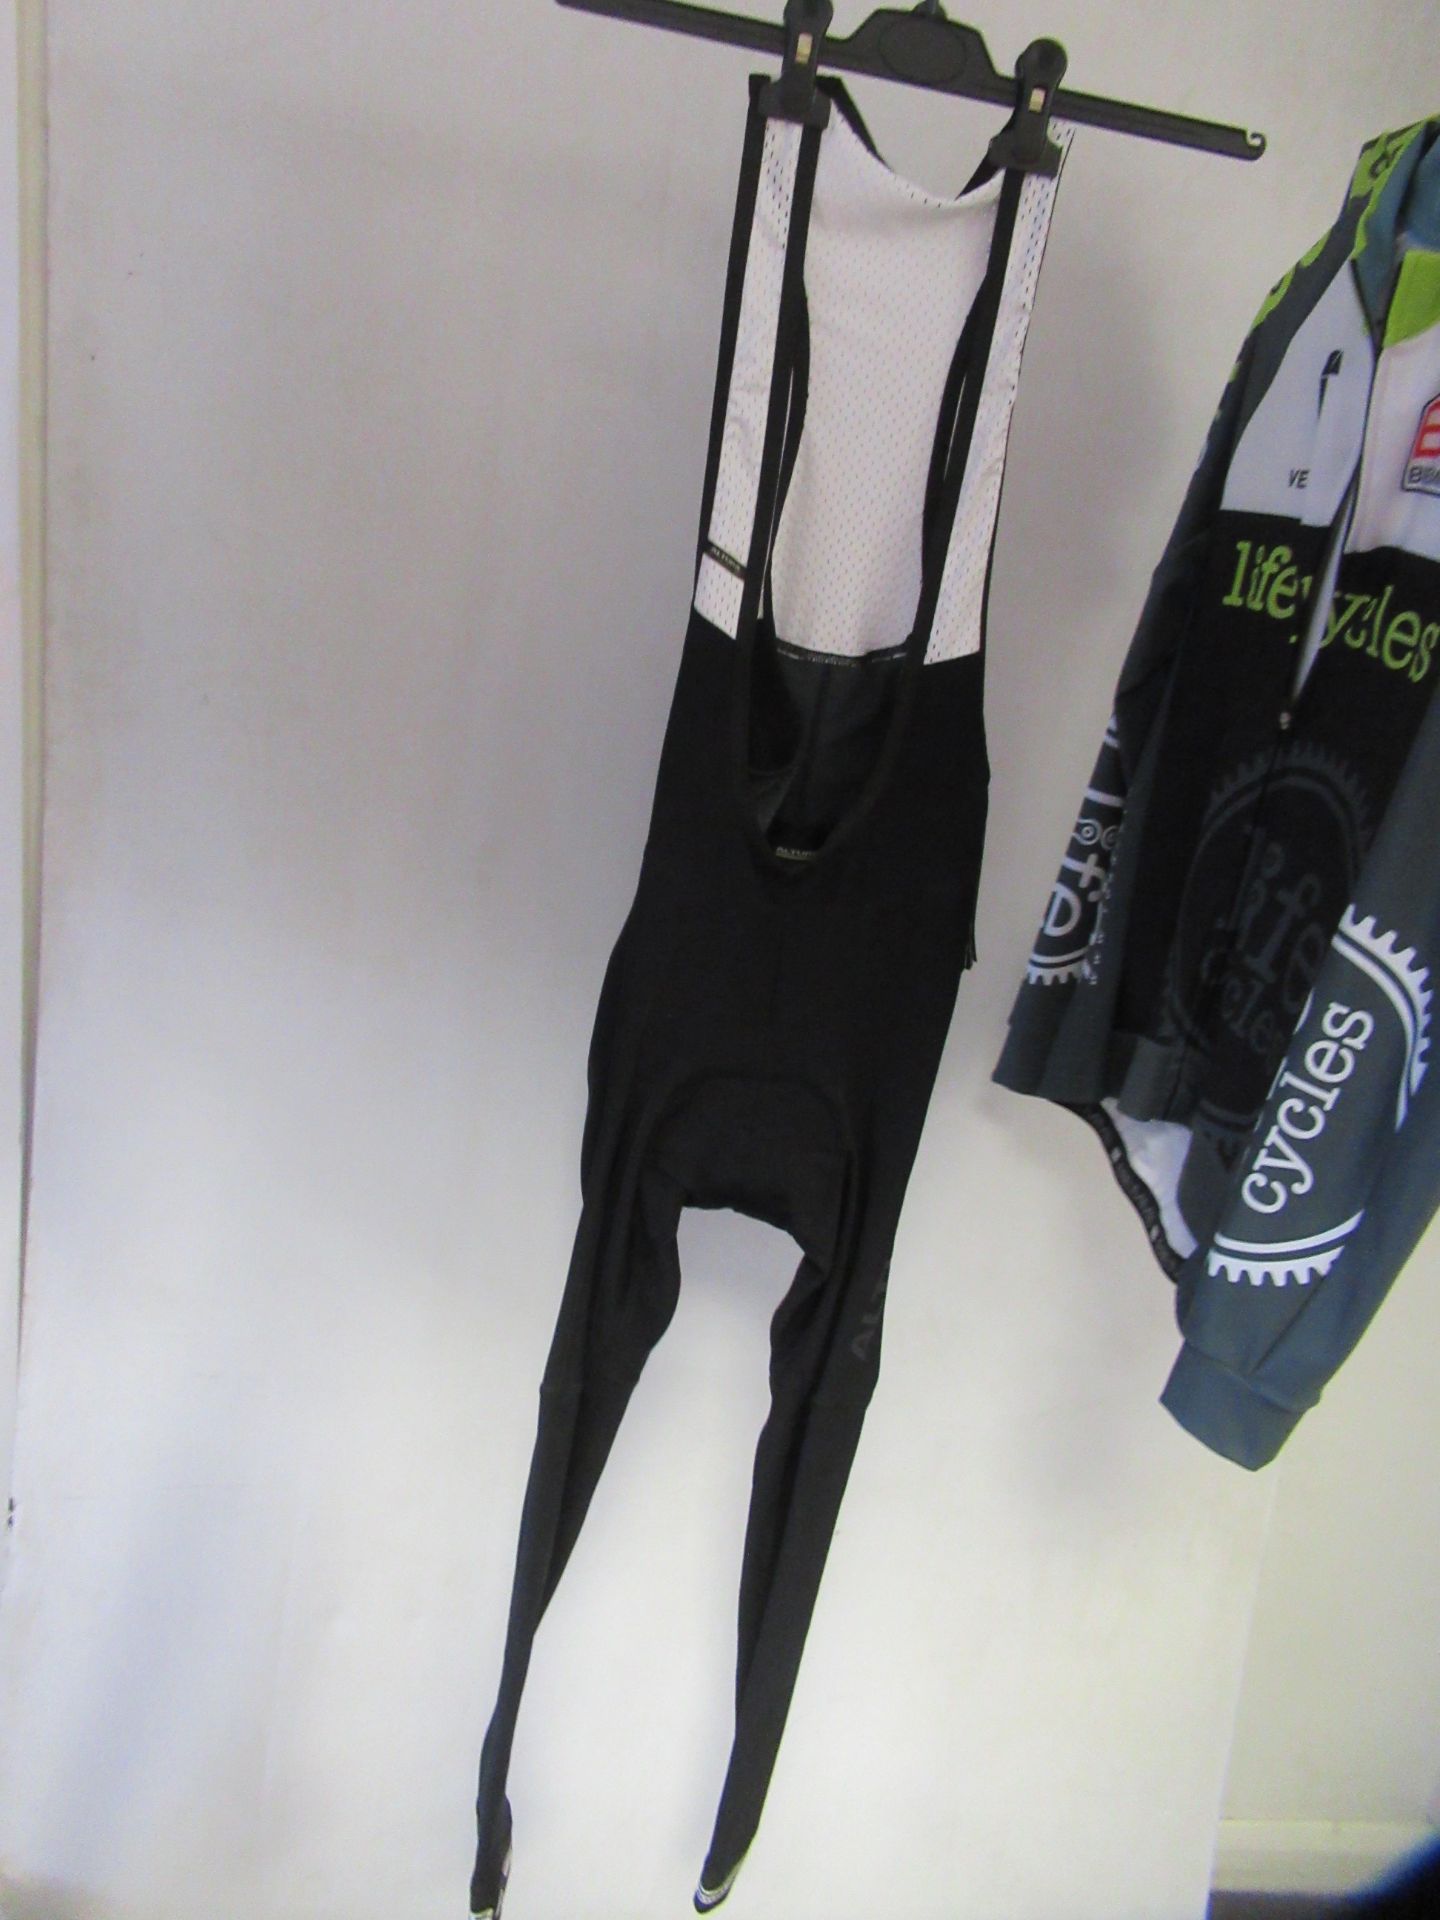 M Male Cycling Clothes - Image 3 of 6